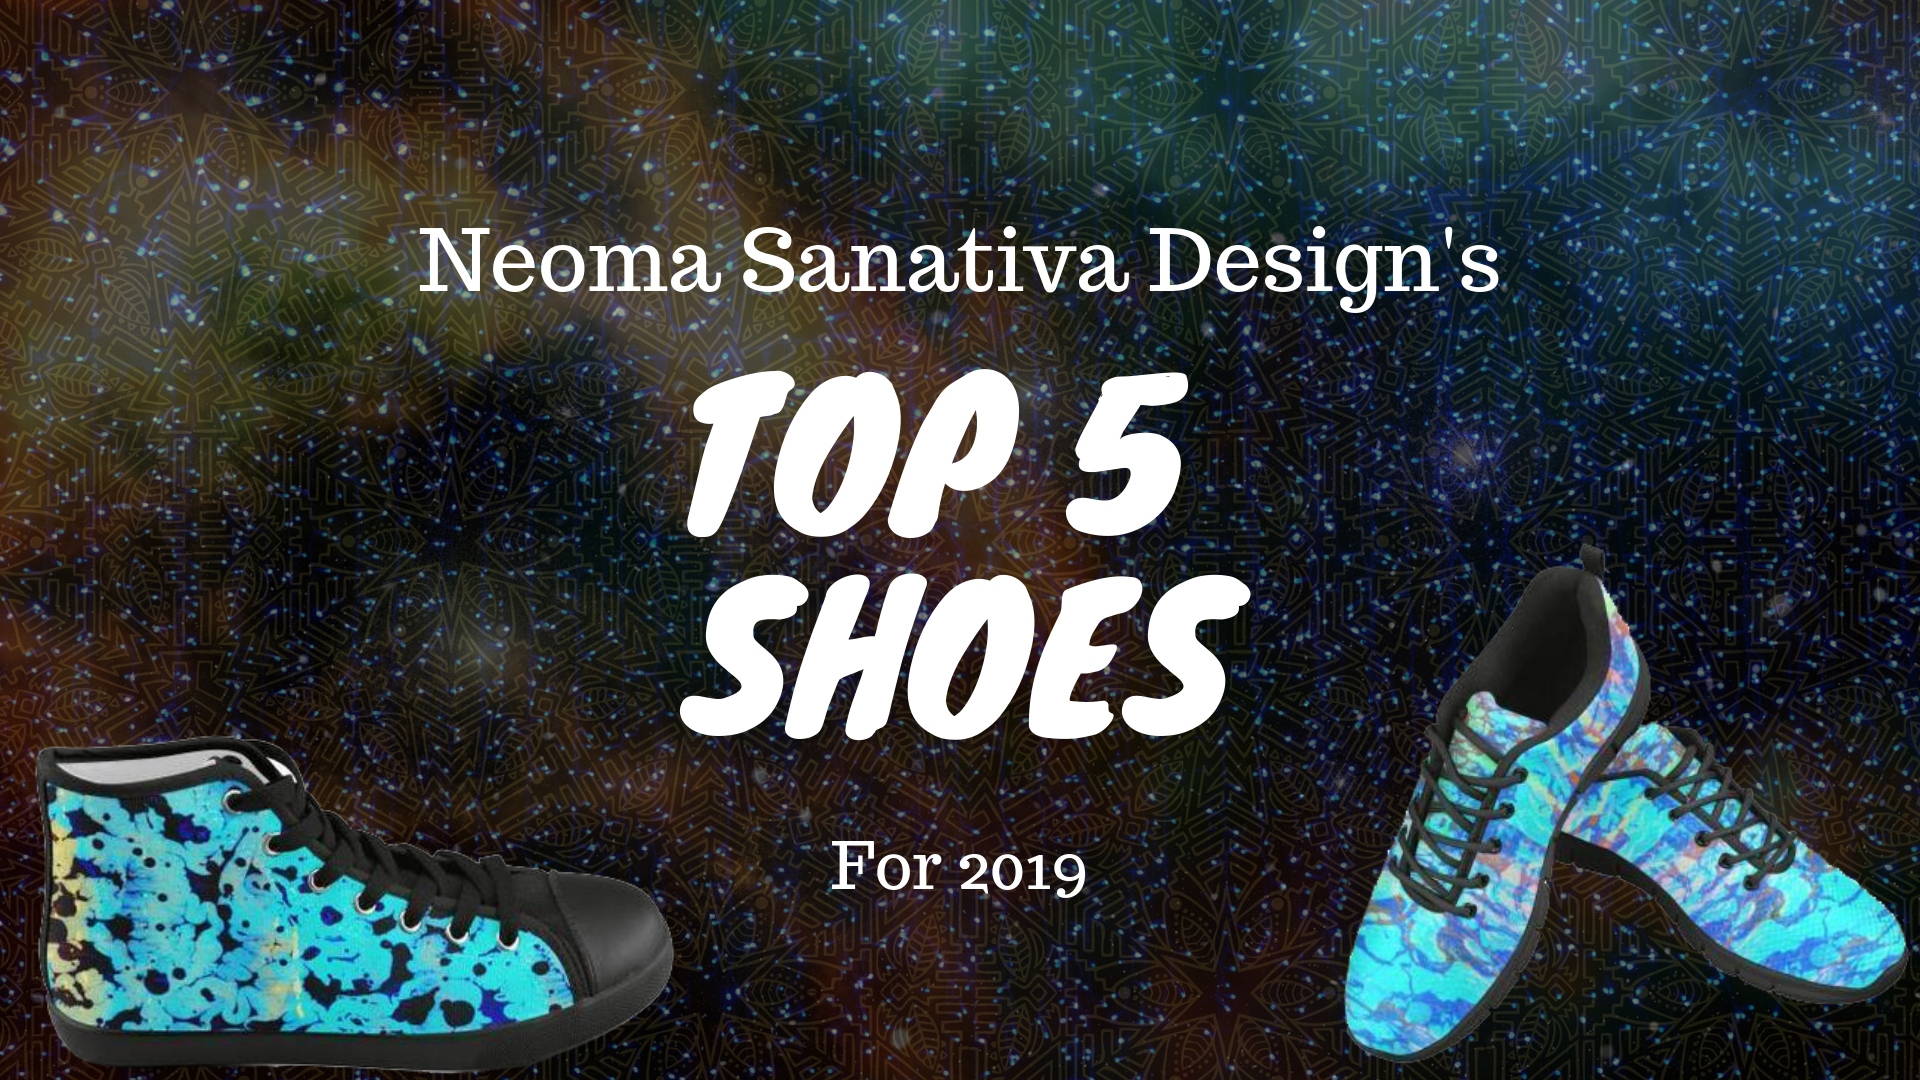 Top 5 Men's Shoes for 2019